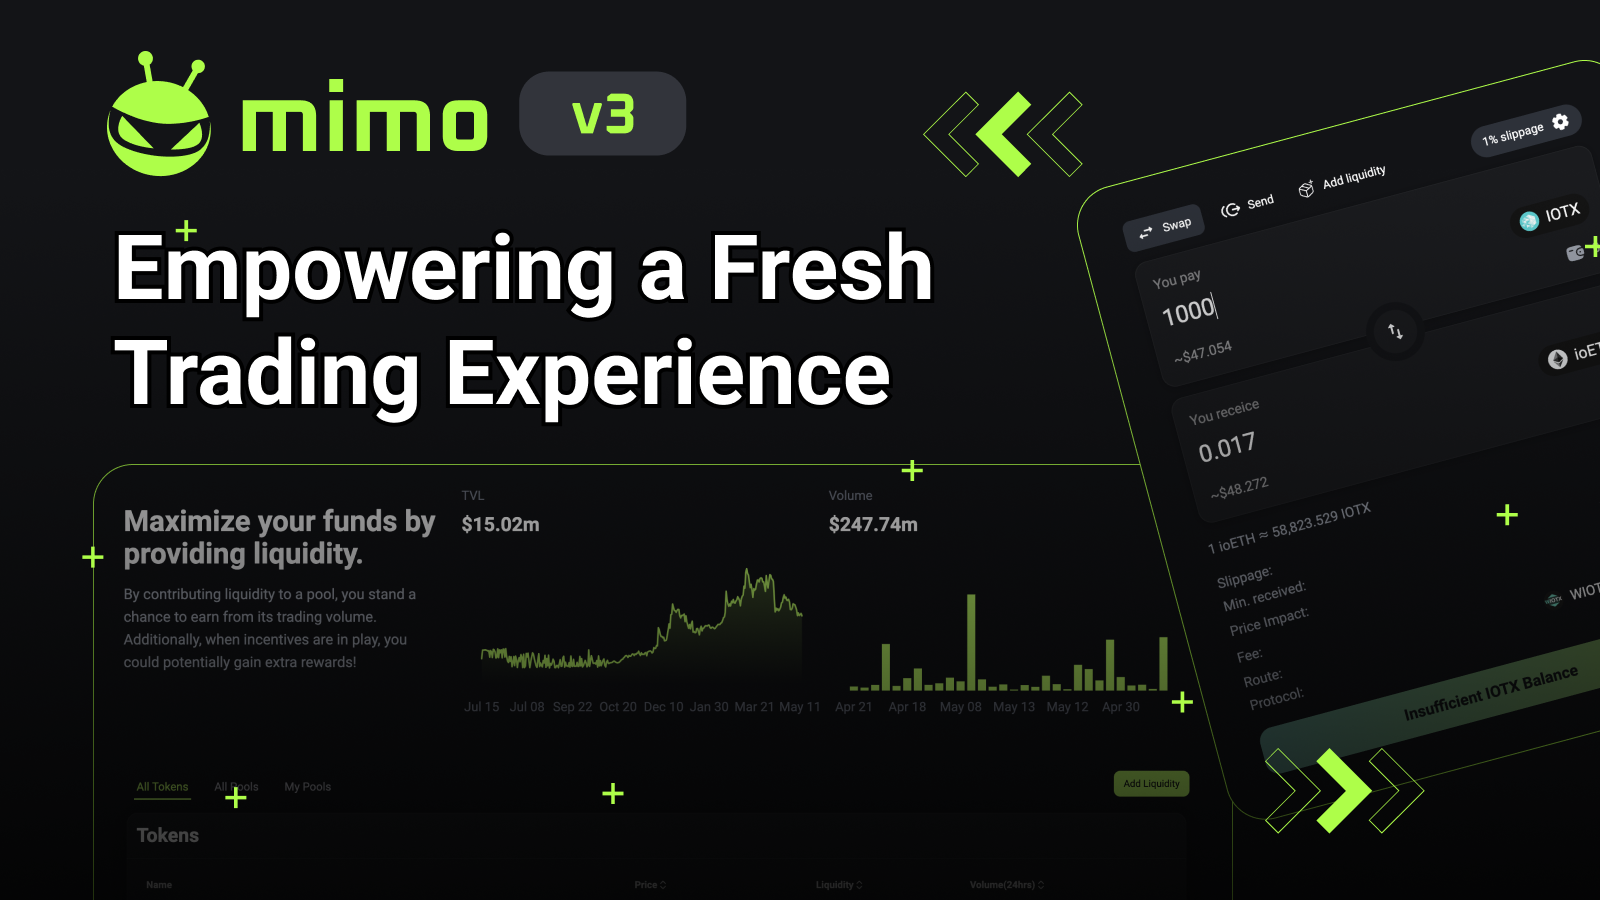 Introducing Mimo V3 Upgrade - Empowering a Fresh Trading Experience